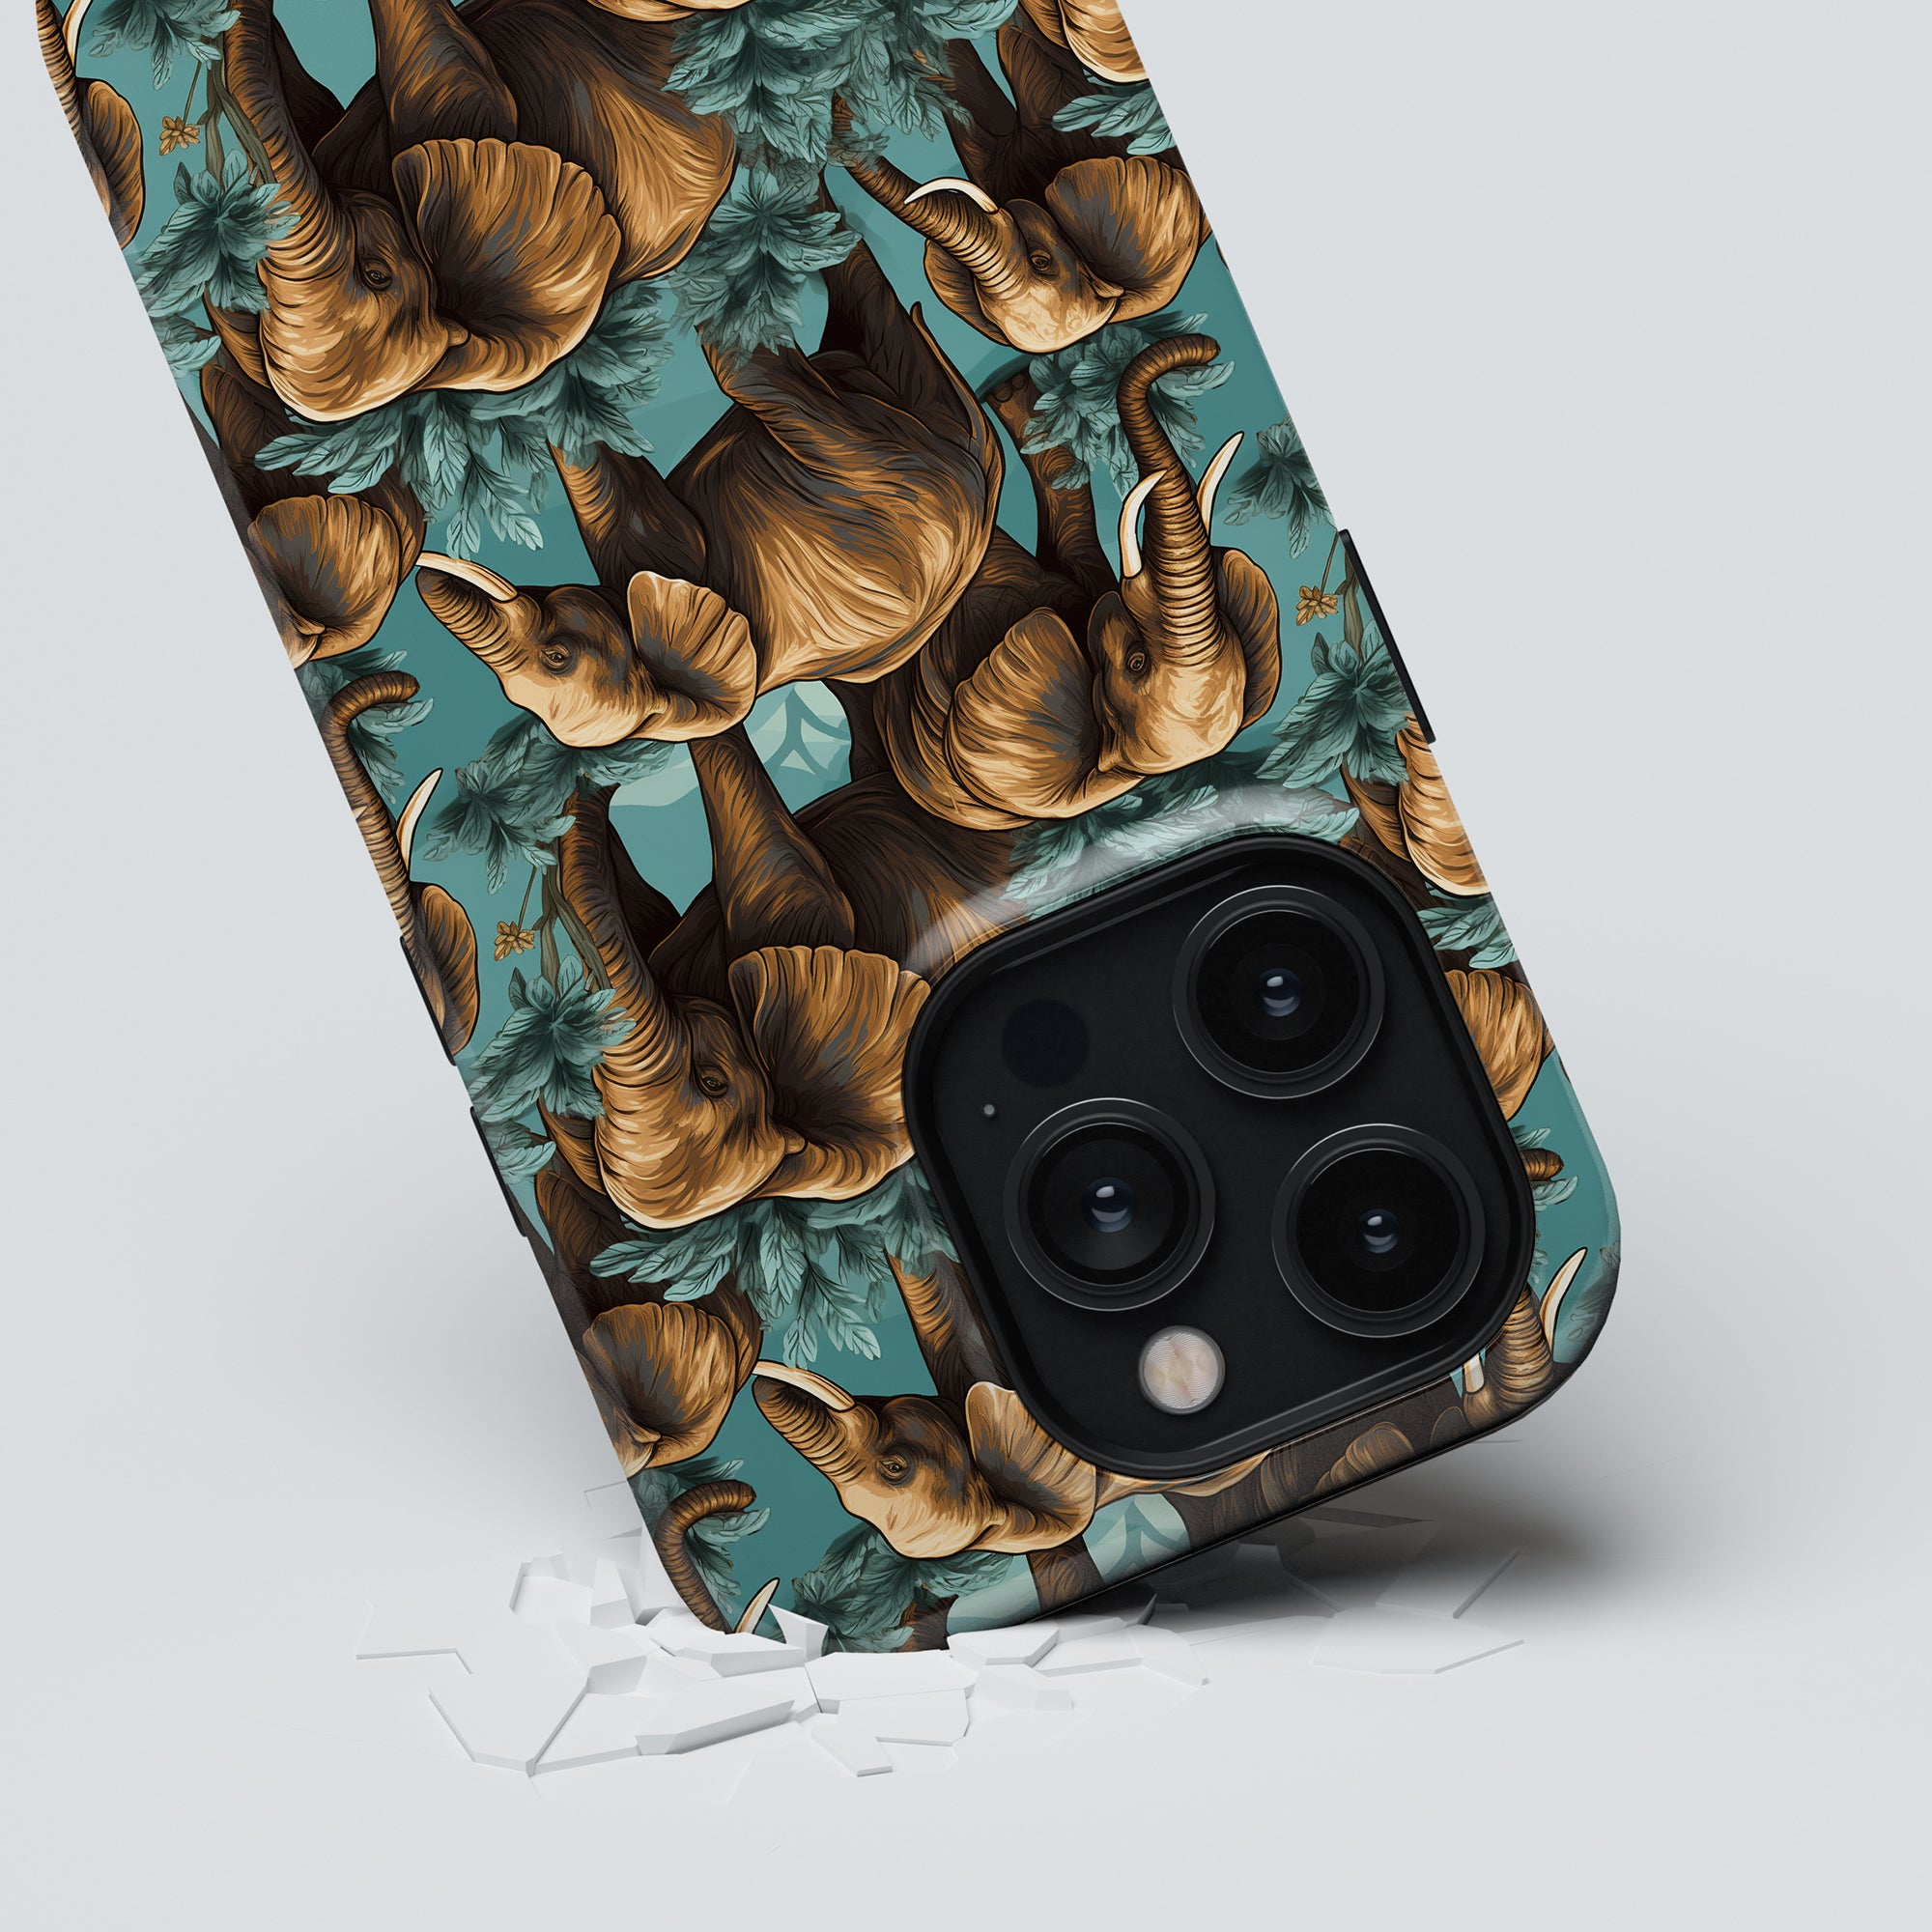 A smartphone with an intricate elephant design from the Hathi - Tough Case is placed on a light surface, surrounded by scattered pieces of shattered glass.